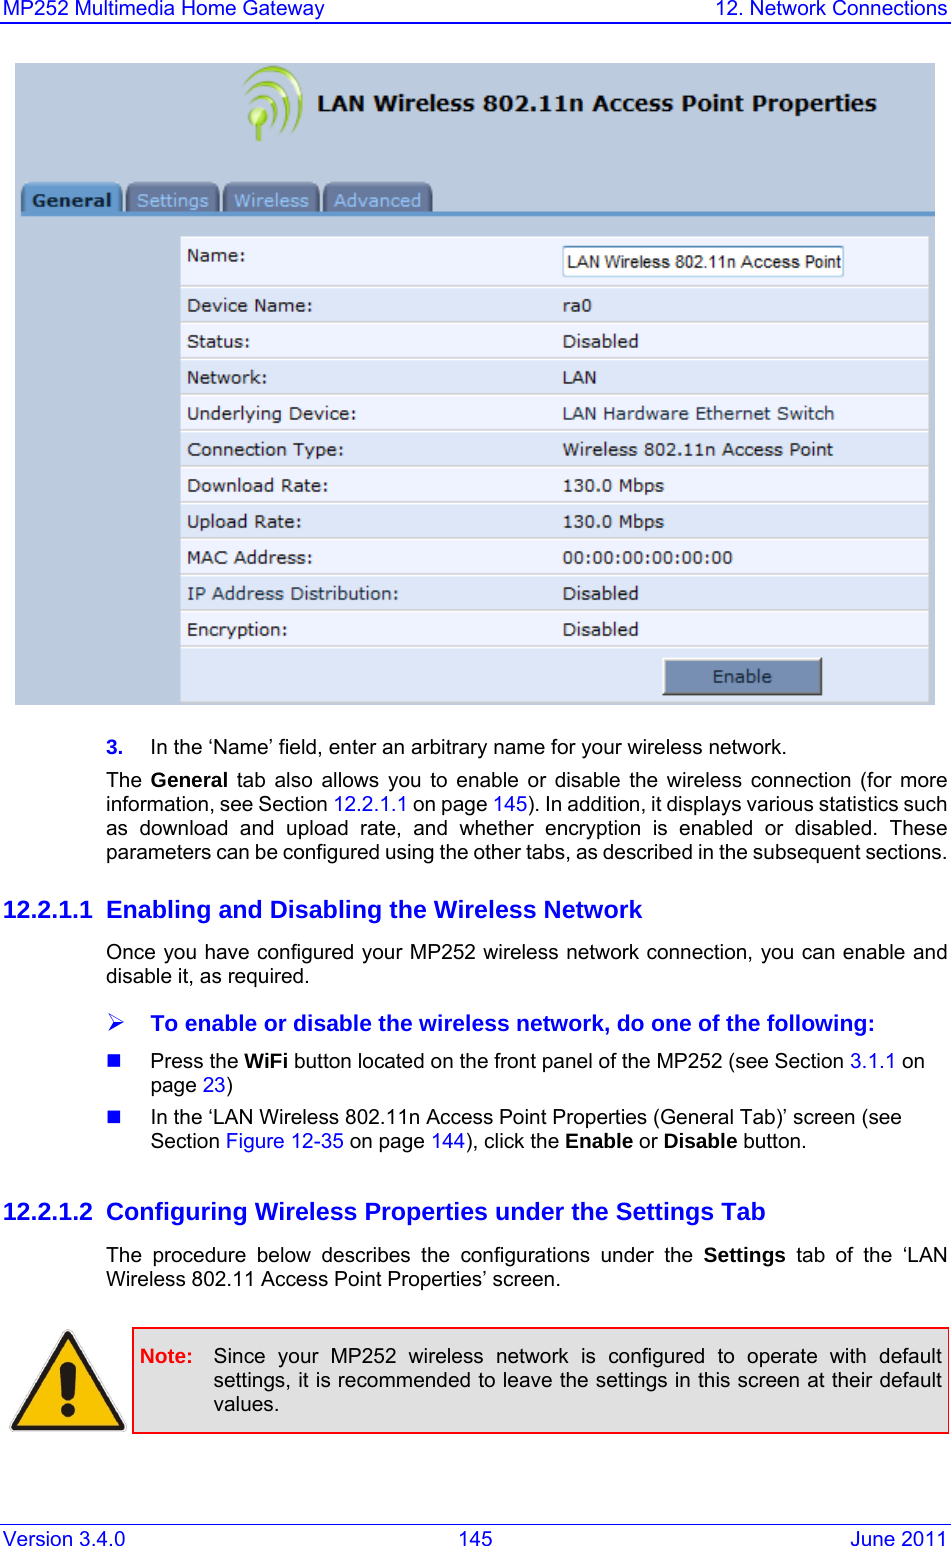 MP252 Multimedia Home Gateway  12. Network Connections Version 3.4.0  145  June 2011  3.  In the ‘Name’ field, enter an arbitrary name for your wireless network. The  General tab also allows you to enable or disable the wireless connection (for more information, see Section 12.2.1.1 on page 145). In addition, it displays various statistics such as download and upload rate, and whether encryption is enabled or disabled. These parameters can be configured using the other tabs, as described in the subsequent sections. 12.2.1.1  Enabling and Disabling the Wireless Network Once you have configured your MP252 wireless network connection, you can enable and disable it, as required.  ¾ To enable or disable the wireless network, do one of the following:  Press the WiFi button located on the front panel of the MP252 (see Section 3.1.1 on page 23)   In the ‘LAN Wireless 802.11n Access Point Properties (General Tab)’ screen (see Section Figure 12-35 on page 144), click the Enable or Disable button.   12.2.1.2 Configuring Wireless Properties under the Settings Tab The procedure below describes the configurations under the Settings tab of the ‘LAN Wireless 802.11 Access Point Properties’ screen.    Note:  Since your MP252 wireless network is configured to operate with default settings, it is recommended to leave the settings in this screen at their default values.  